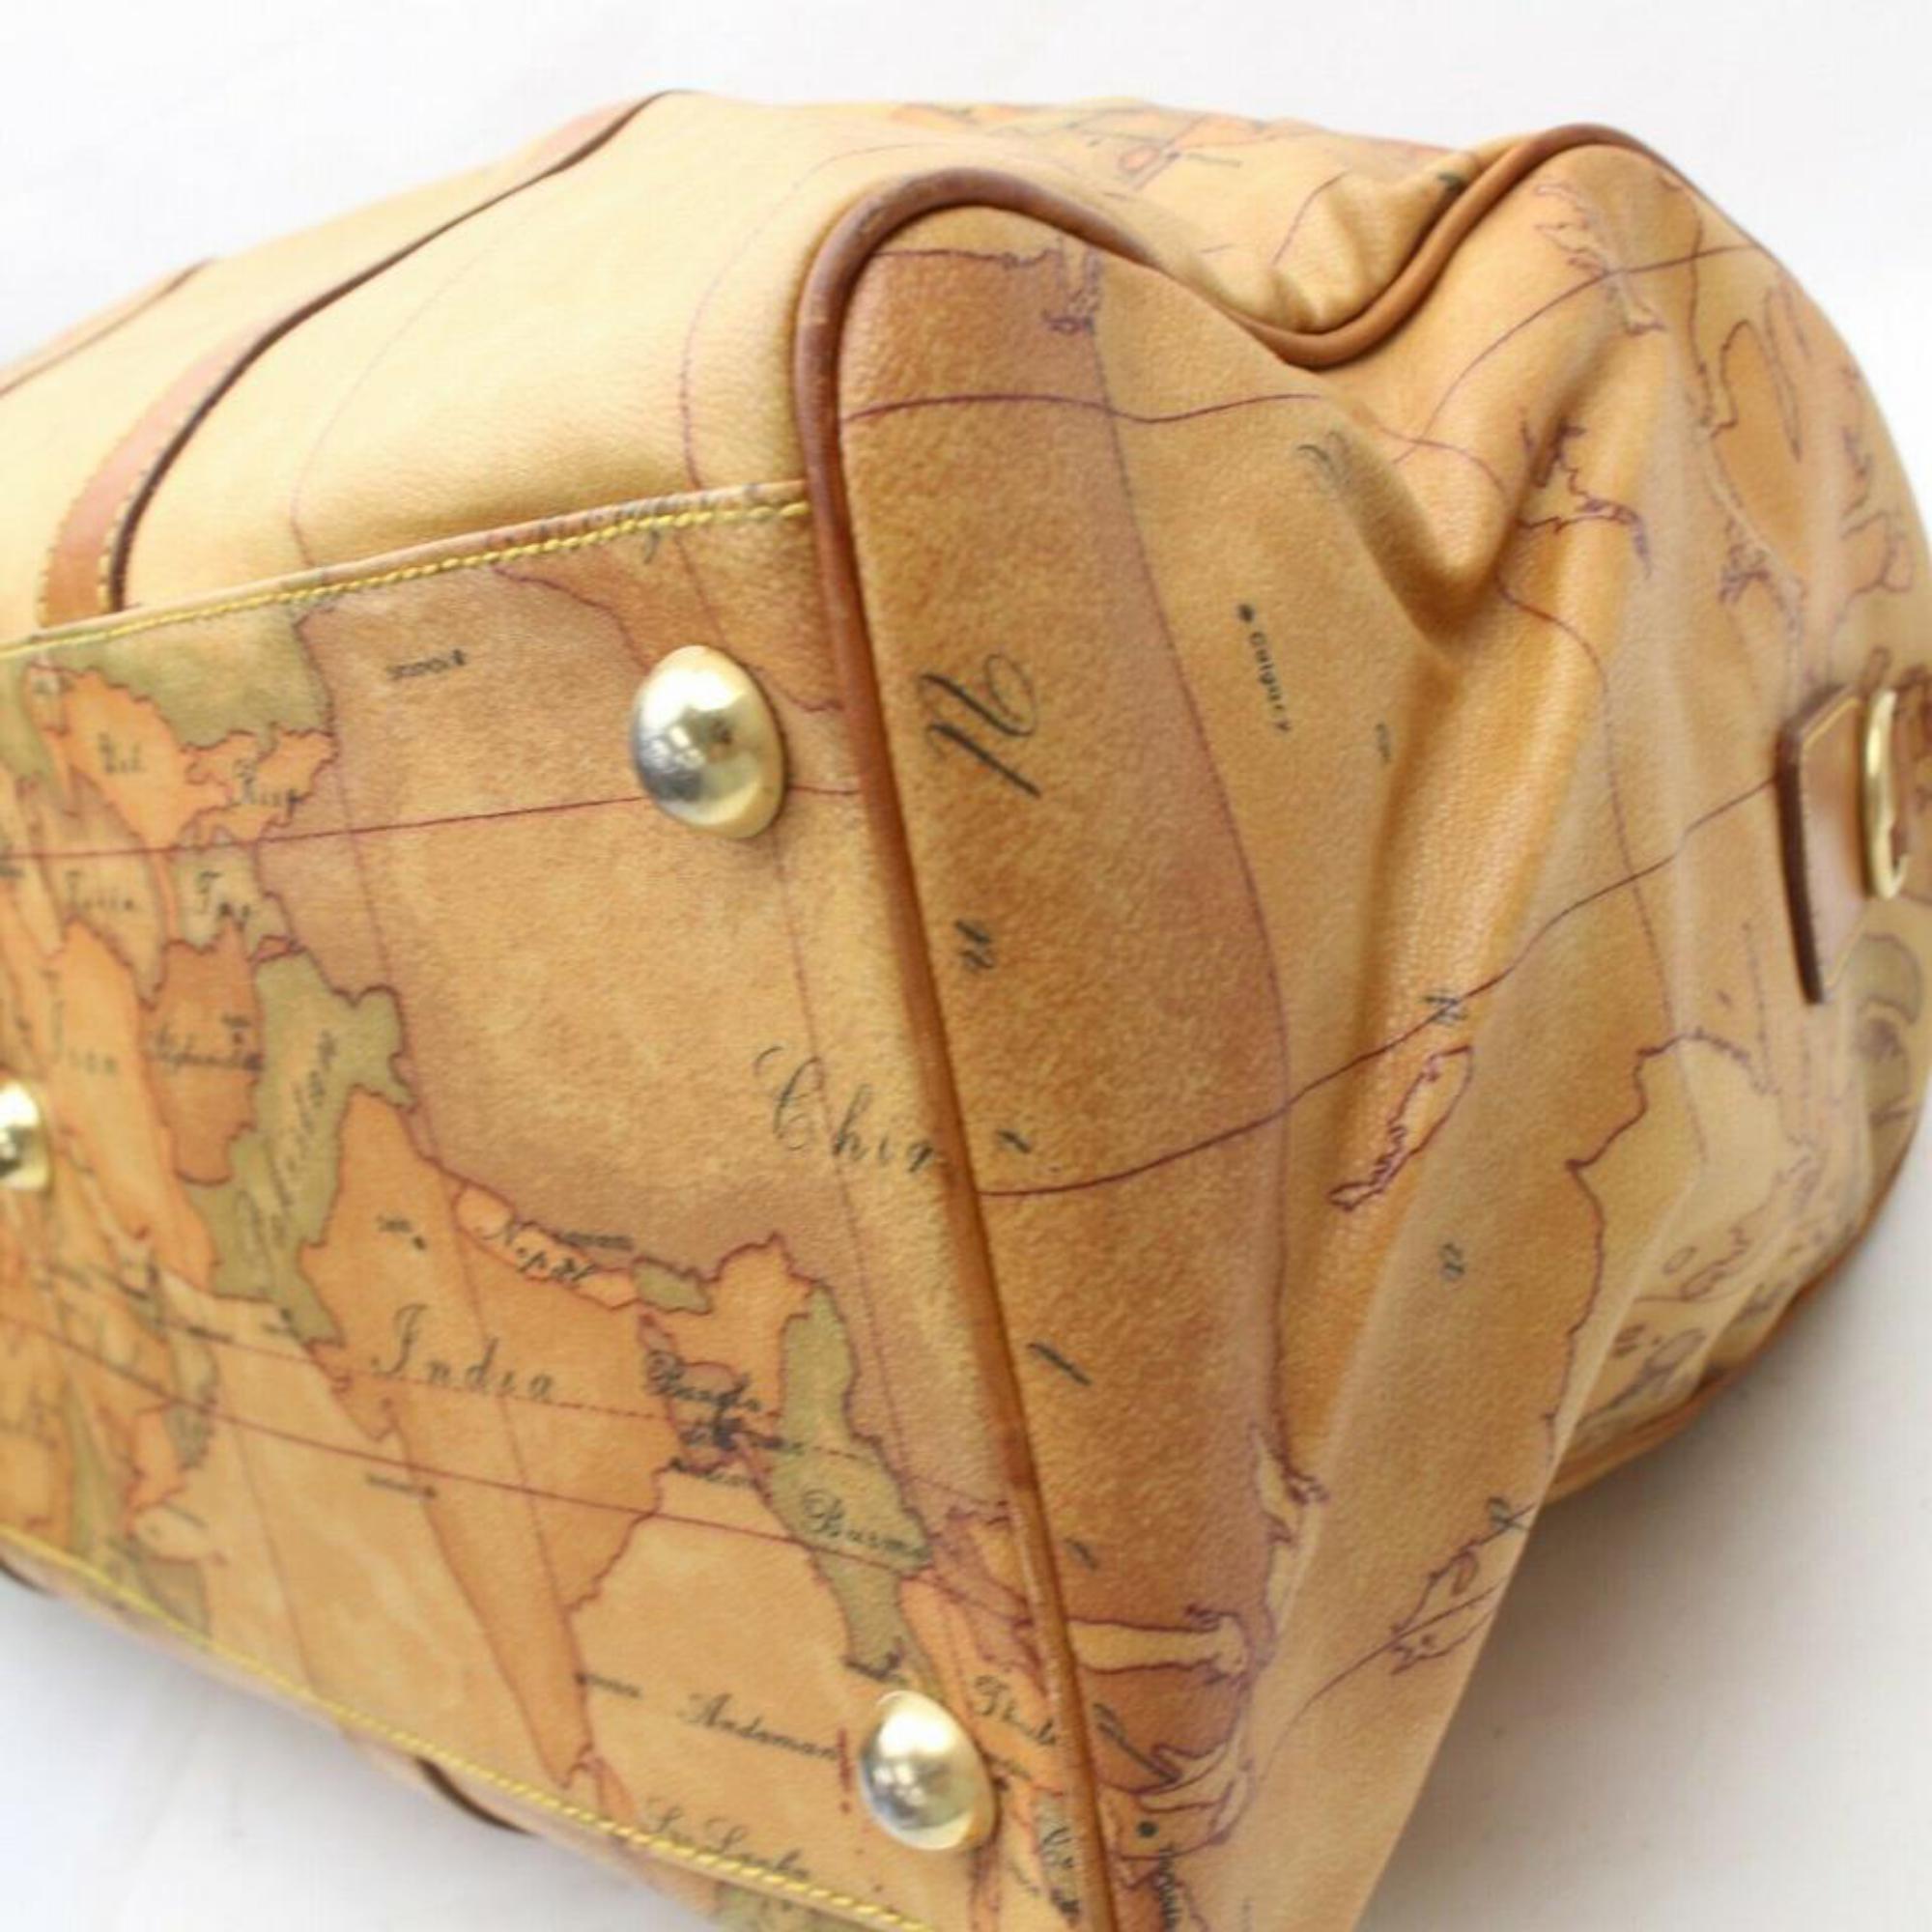 Alviero Martini Classe Map Duffle 870207 Brown Coated Canvas Travel Bag In Good Condition For Sale In Forest Hills, NY